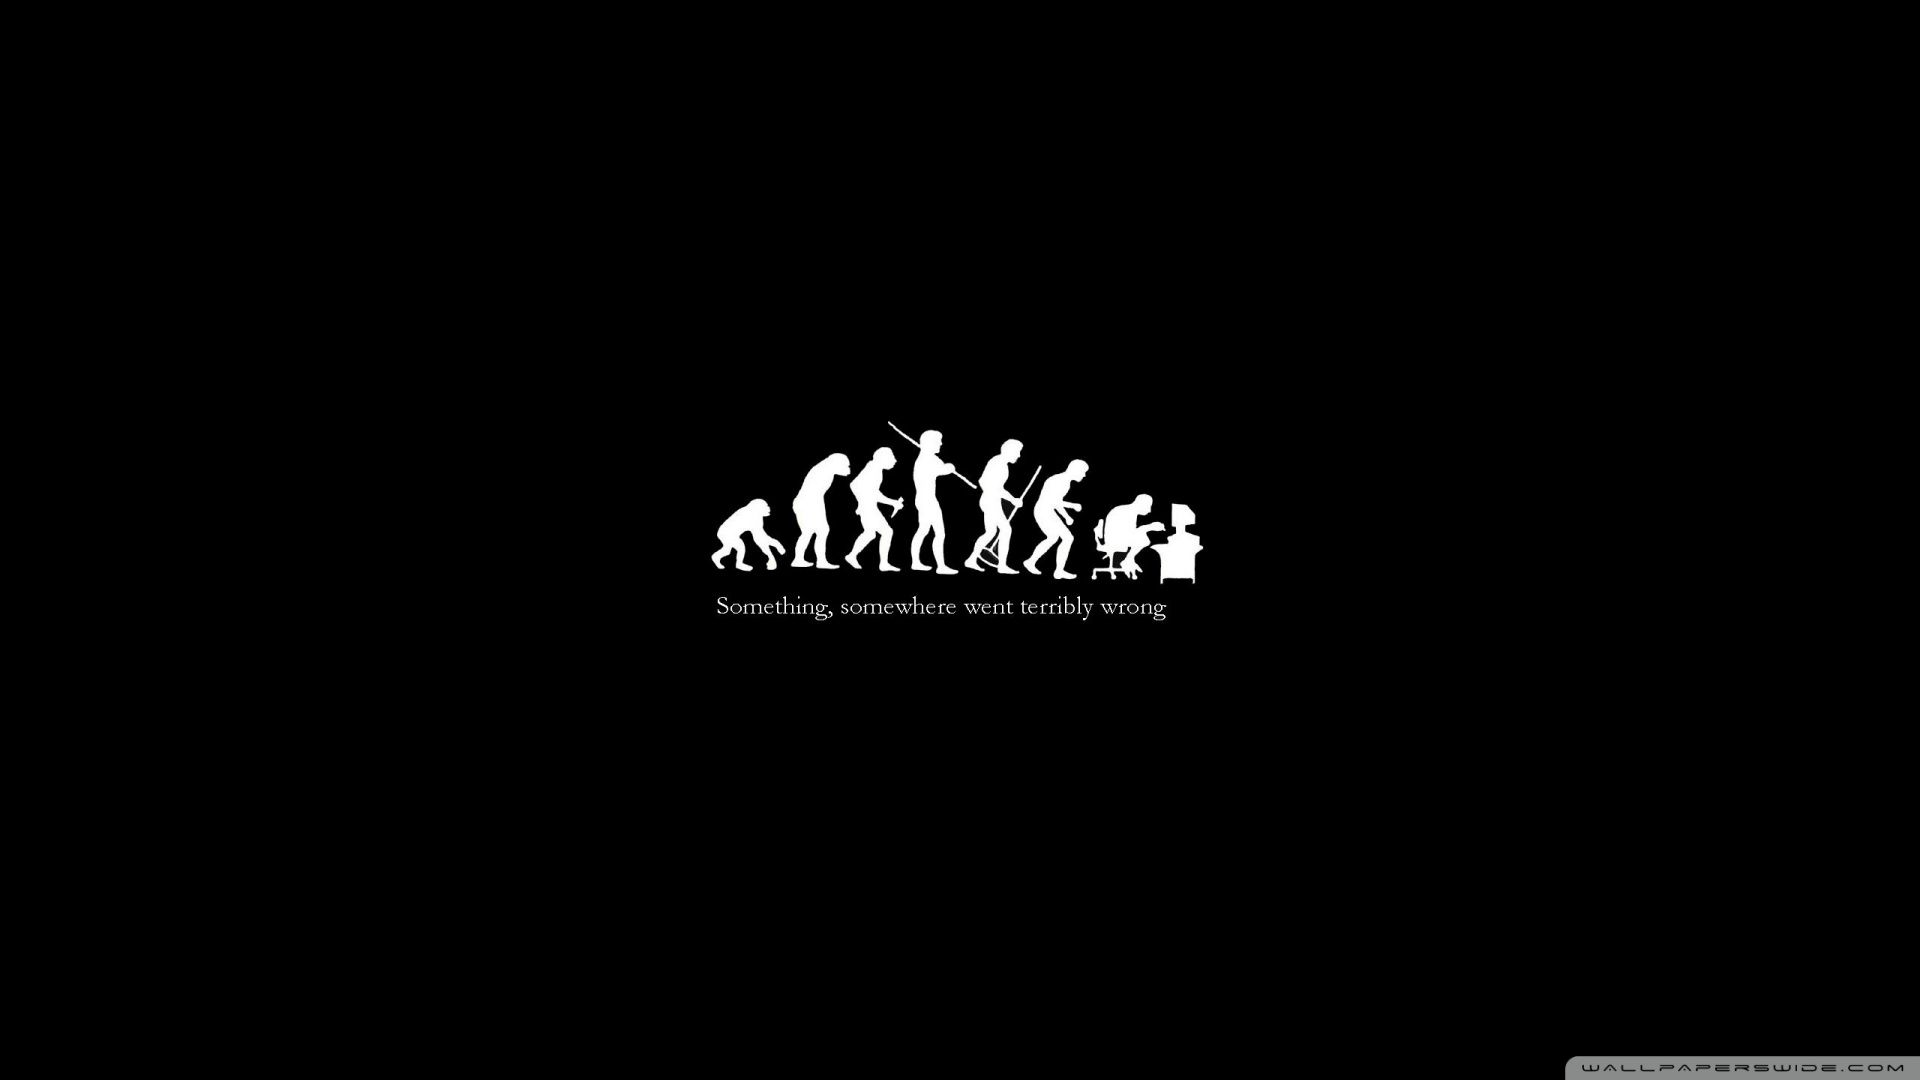 Evolution something went wrong Funny wallpapers Crazy